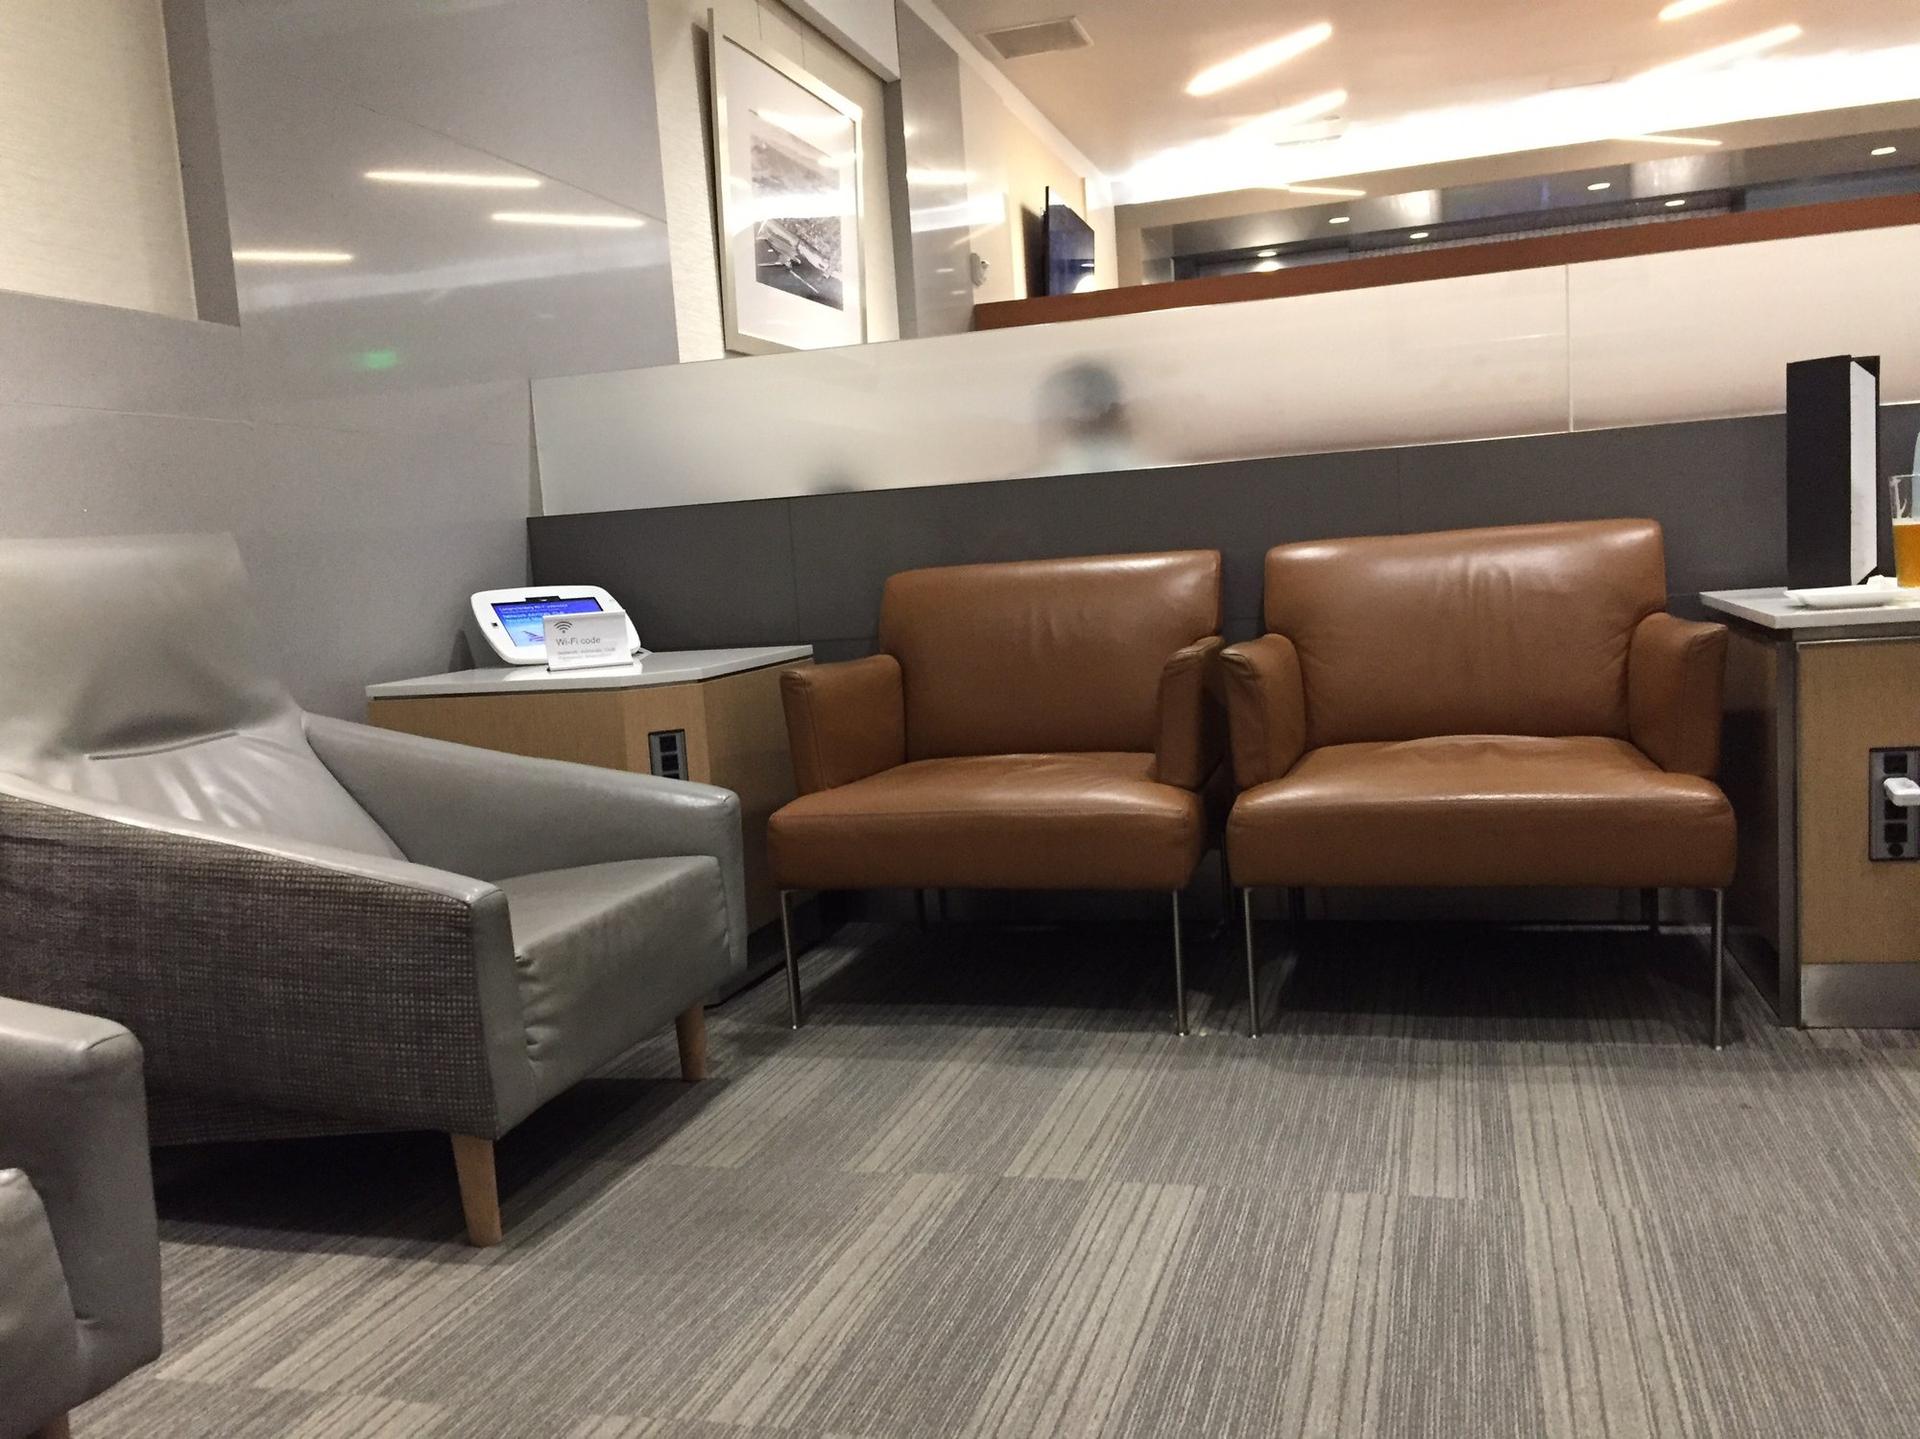 American Airlines Admirals Club image 36 of 43